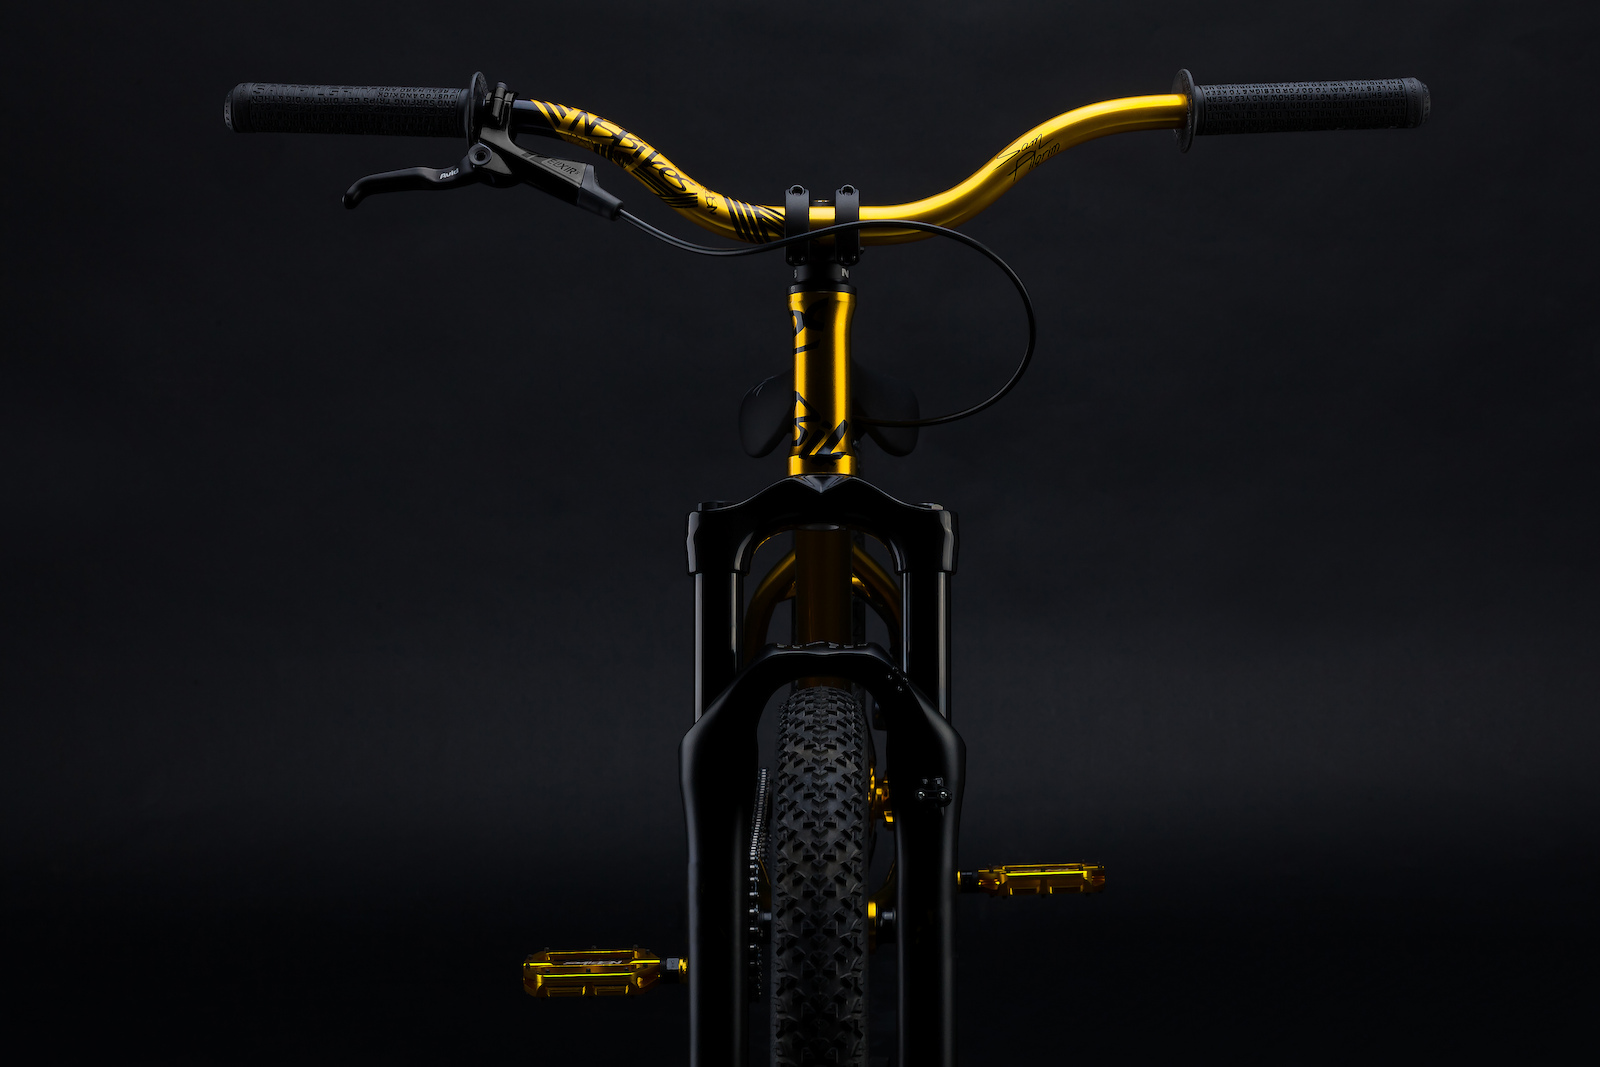 Fitted with the best possible set of components, this is just as good as it gets. Only 15 bikes will be made, each one hand-built in Europe and shipped with a cap signed by Pilgs himself.

http://nsbikes.com/gold